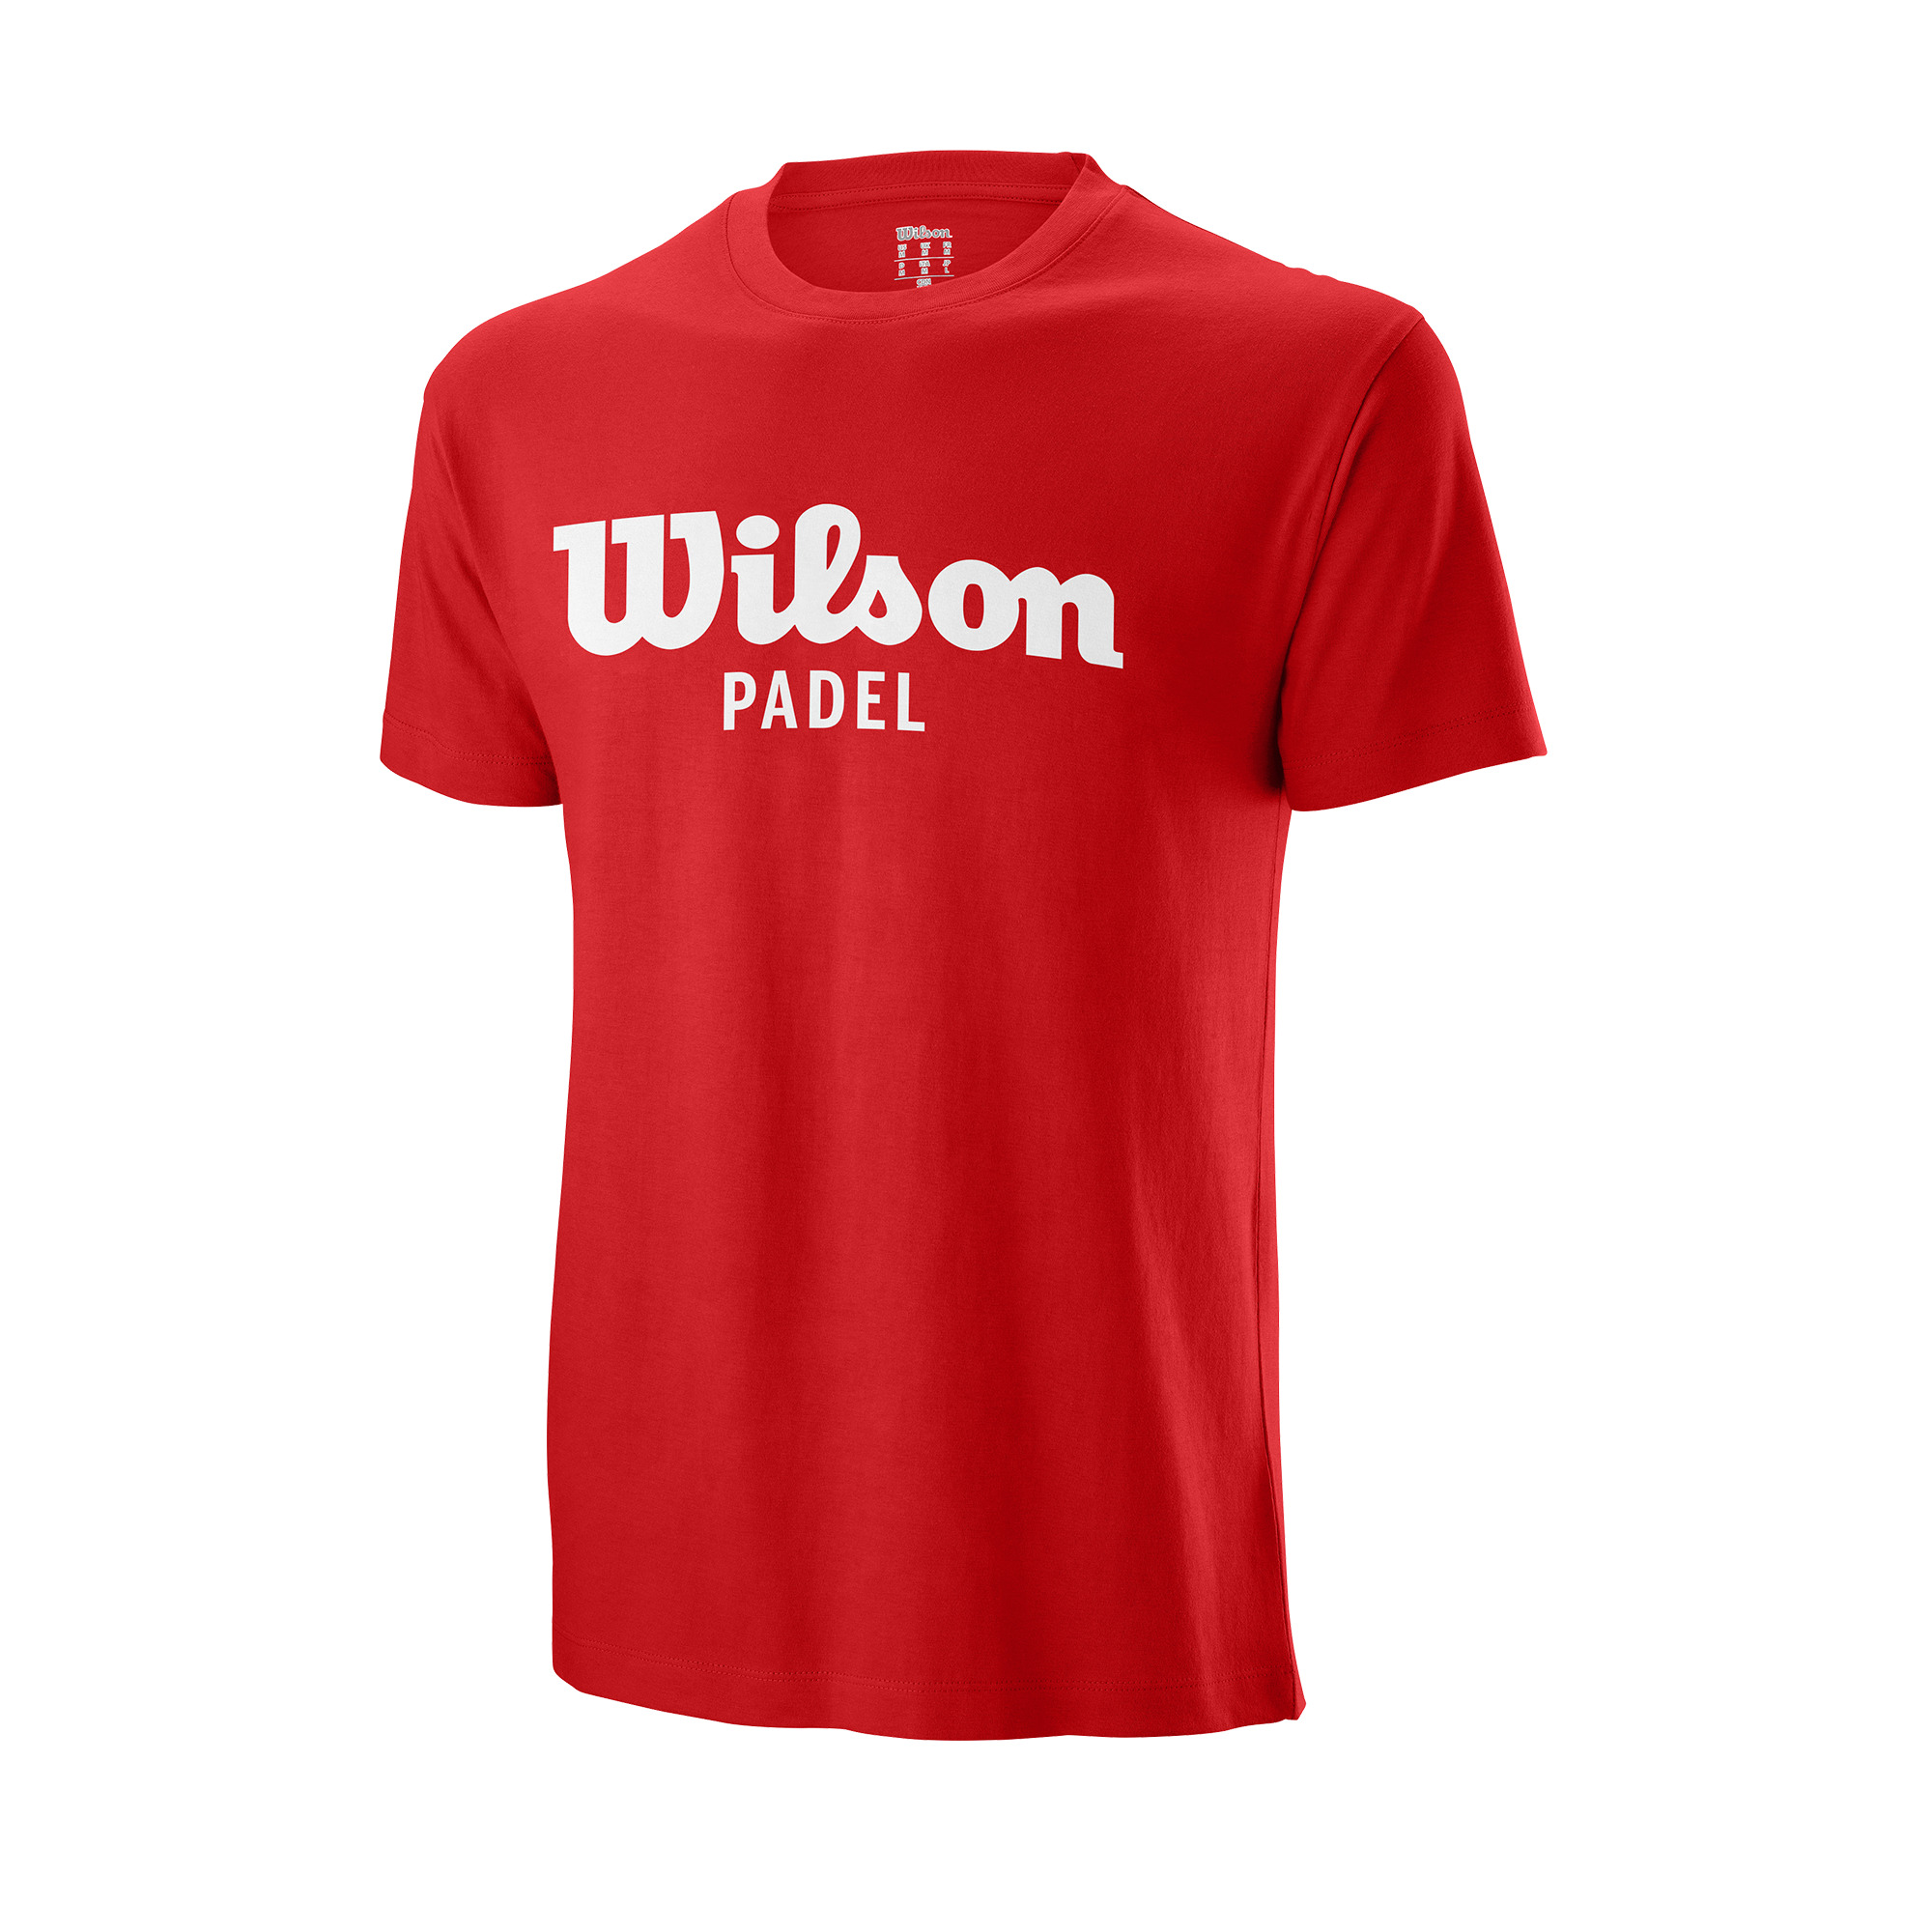 WRA797301_0_Padel_Script_Cotton_Tee_Men_WilsonRed_White_Front.png.high-res